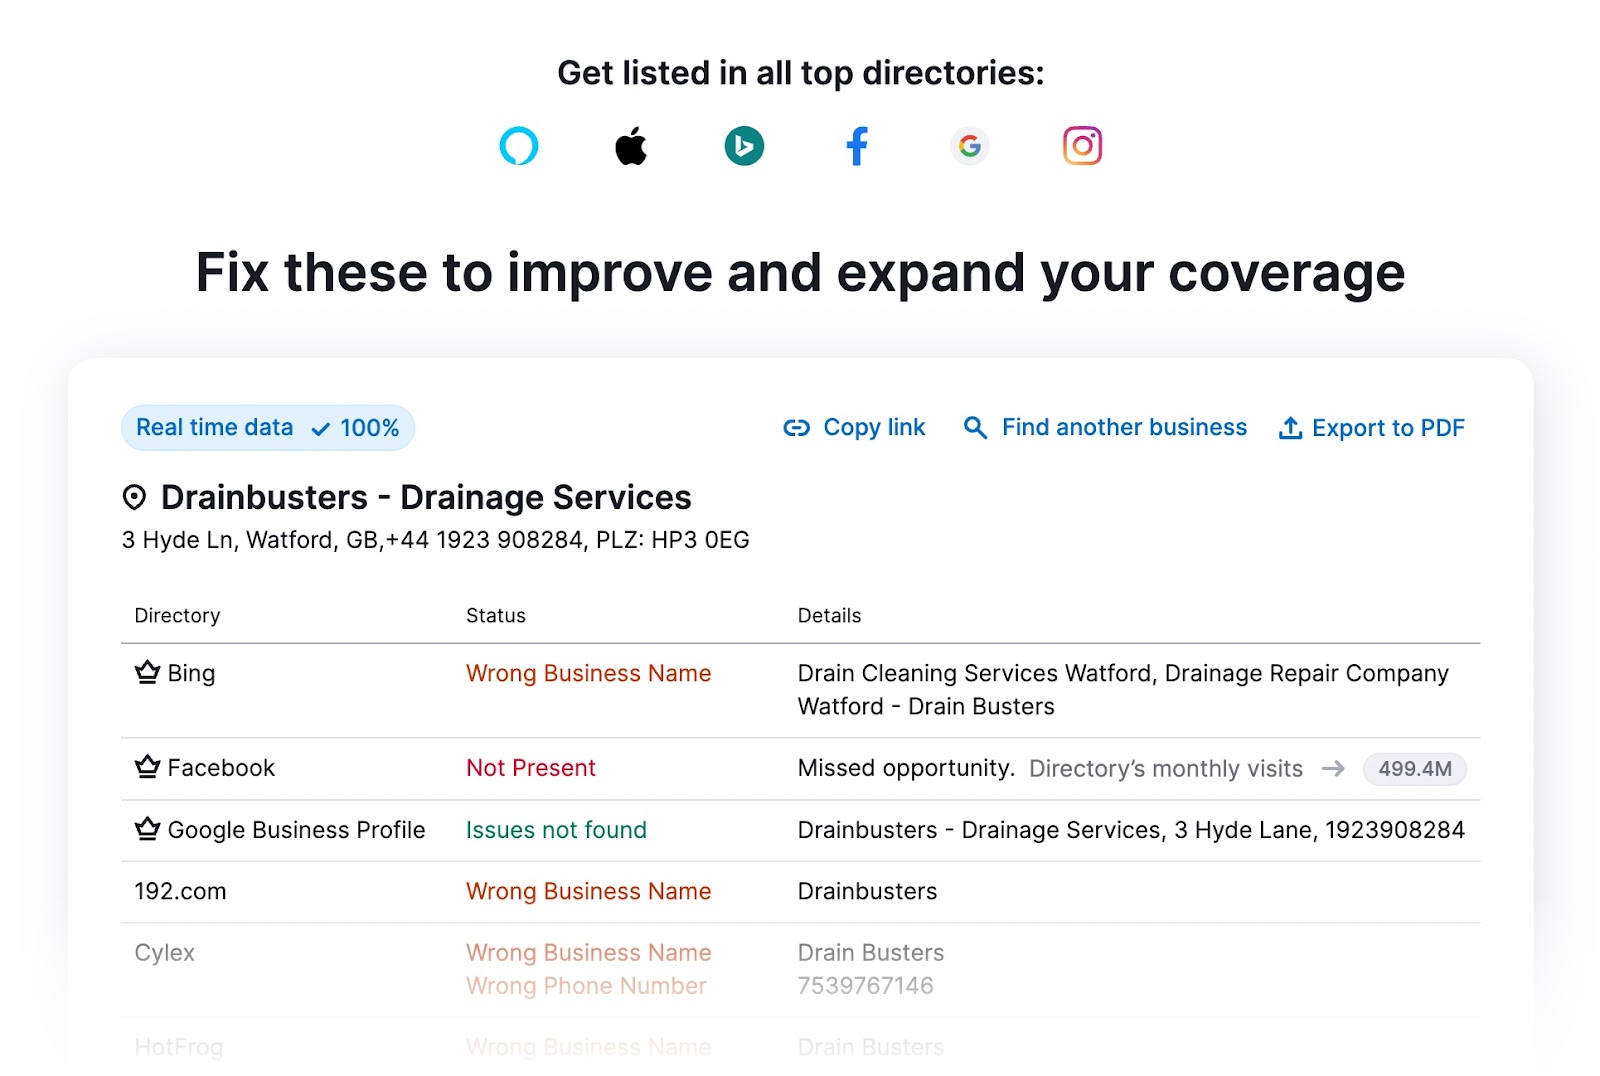 Results for "Drainbusters - Drainage Services" in Listing Management tool